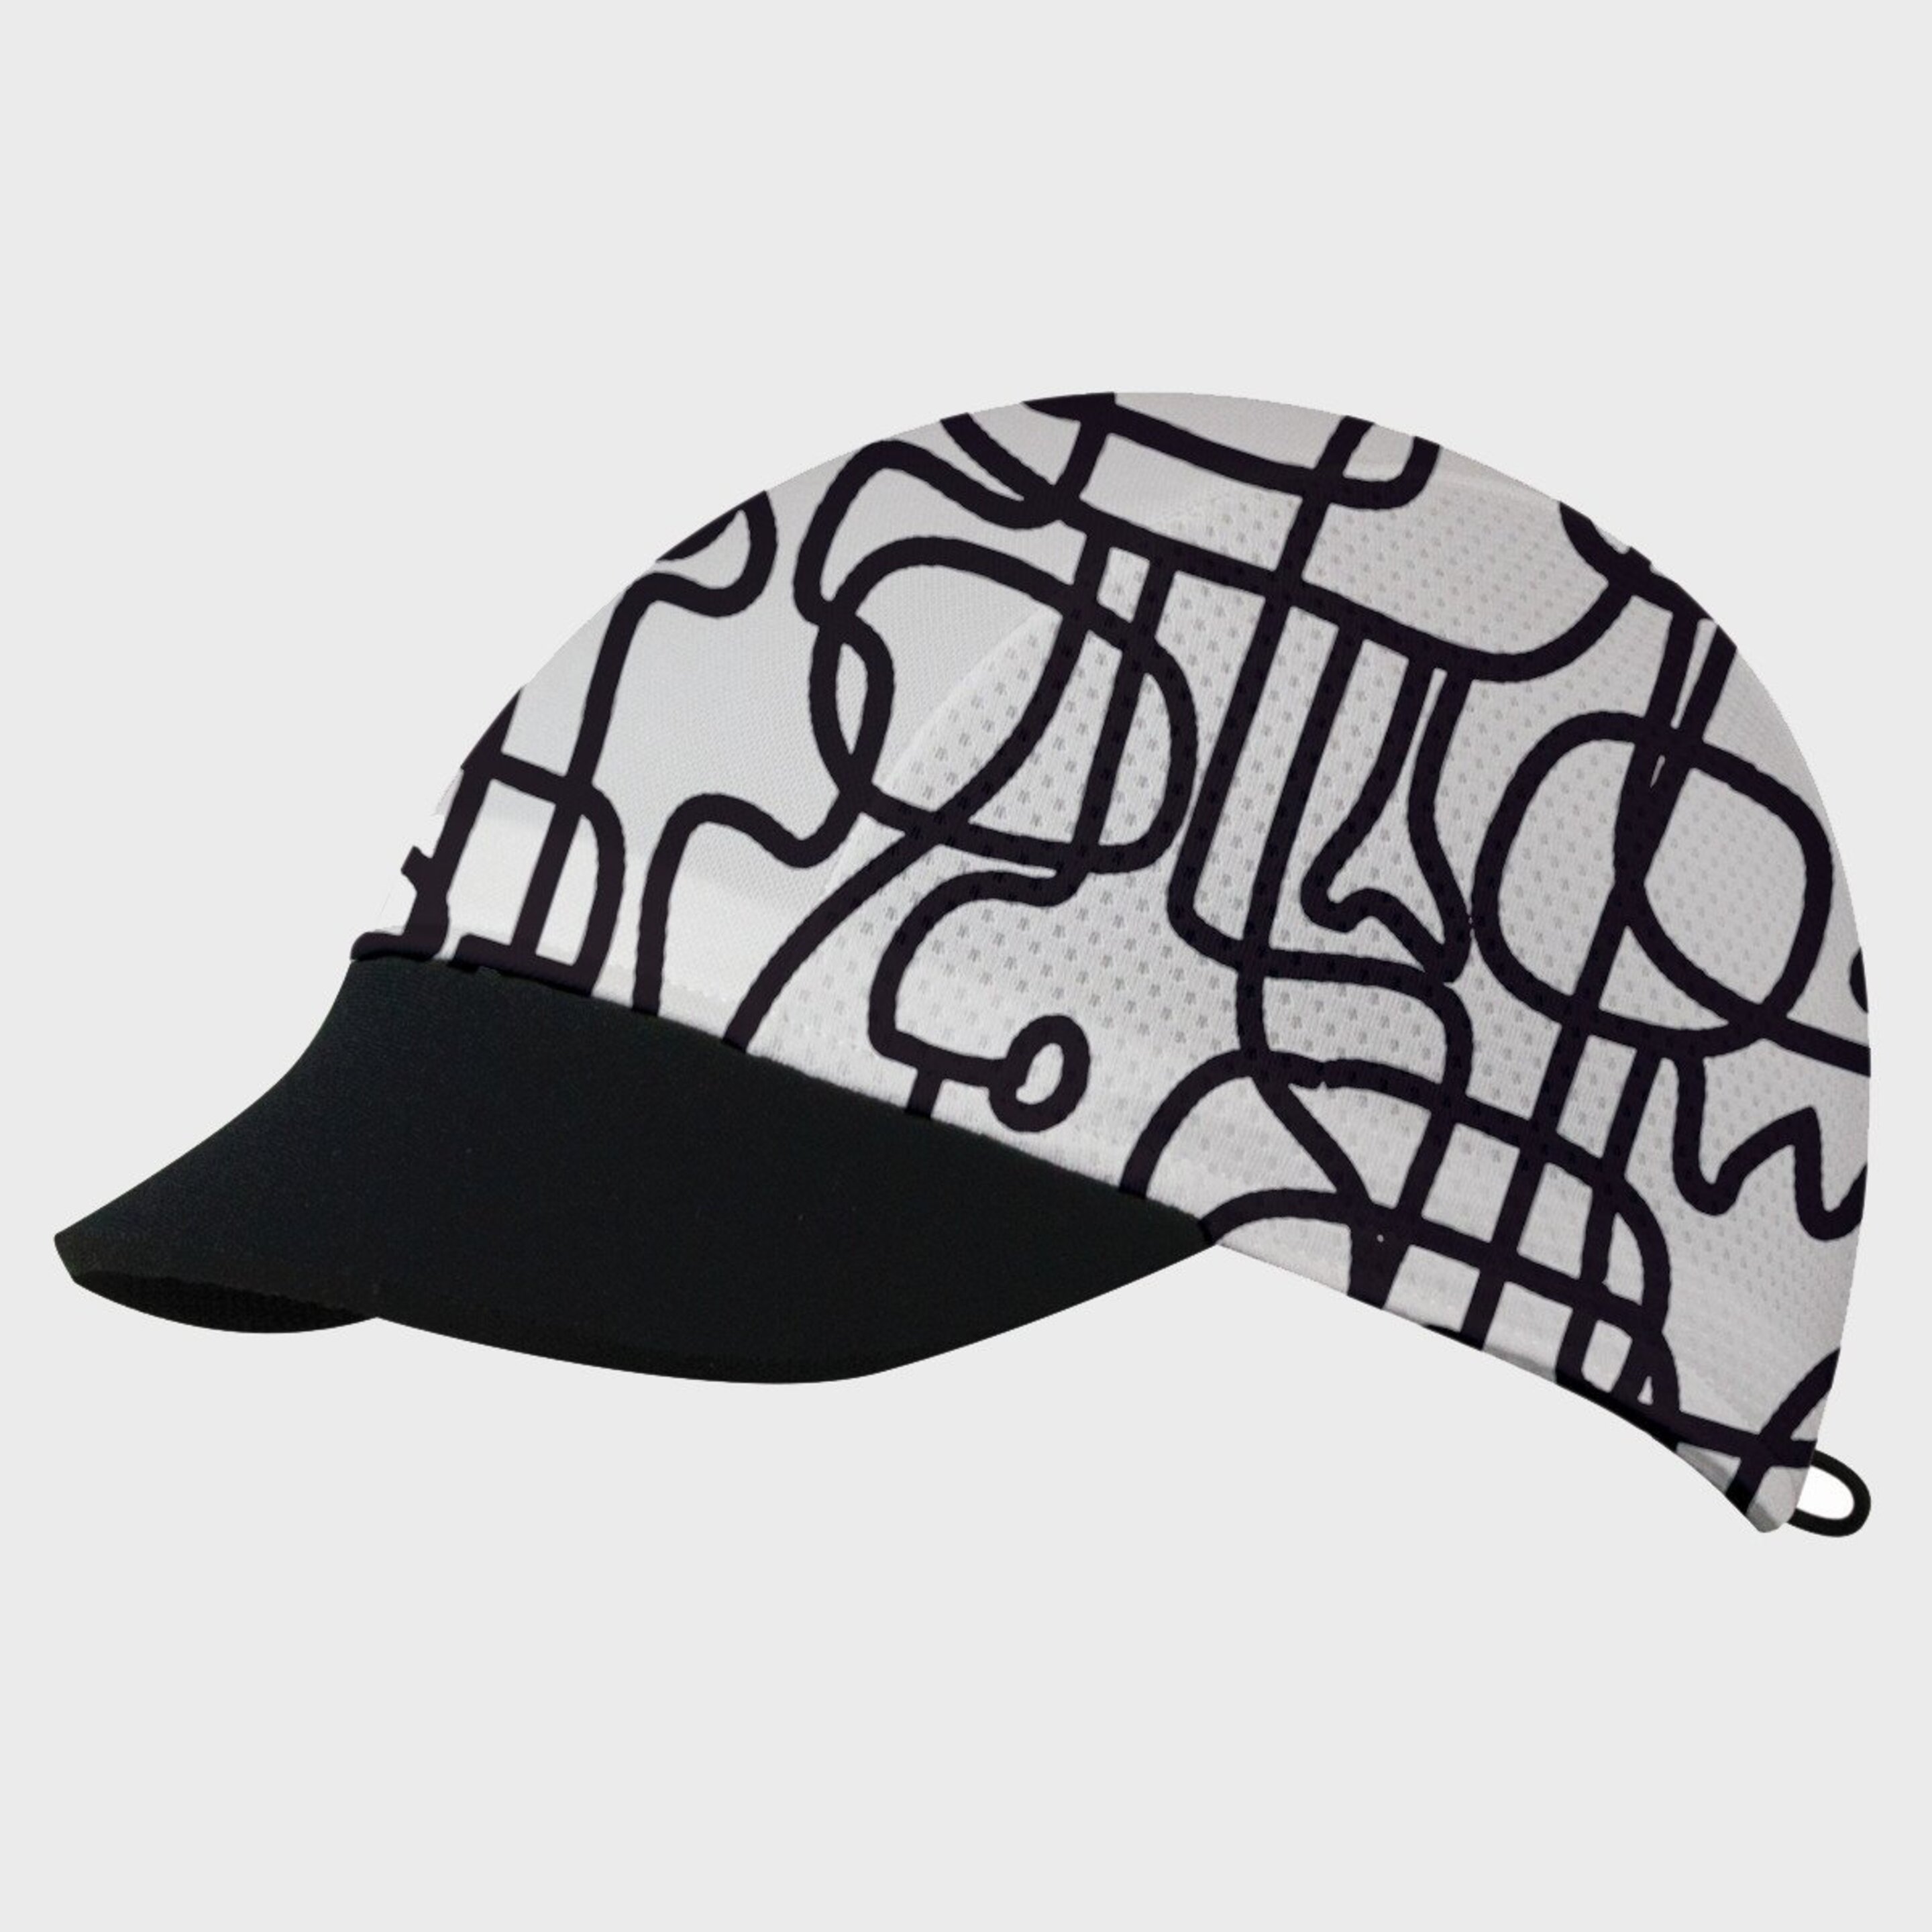 Gorra Coolcap Black And White - multicolor - 